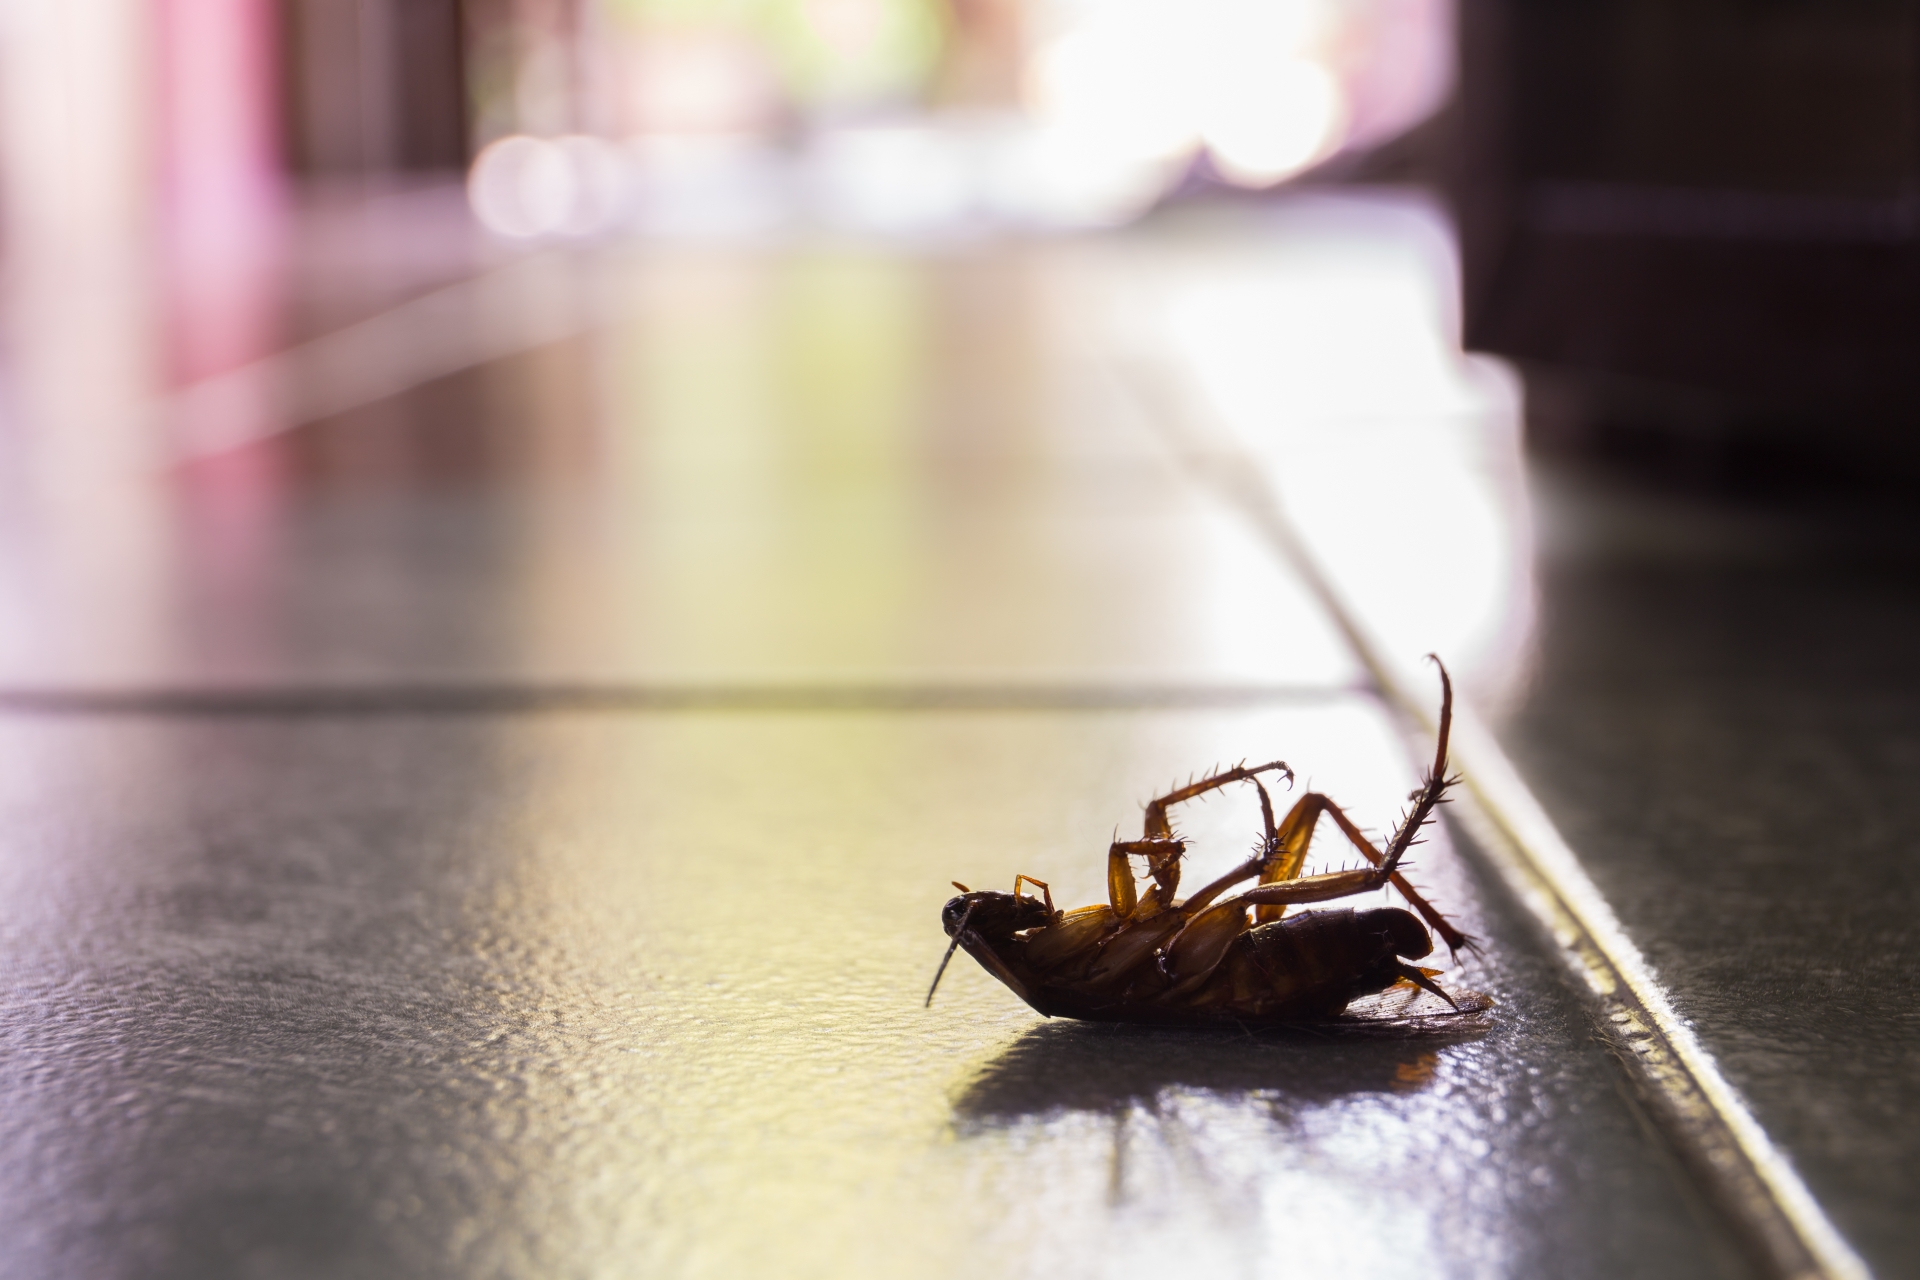 Cockroach Control, Pest Control in Orpington, Chelsfield, Downe, BR6. Call Now 020 8166 9746